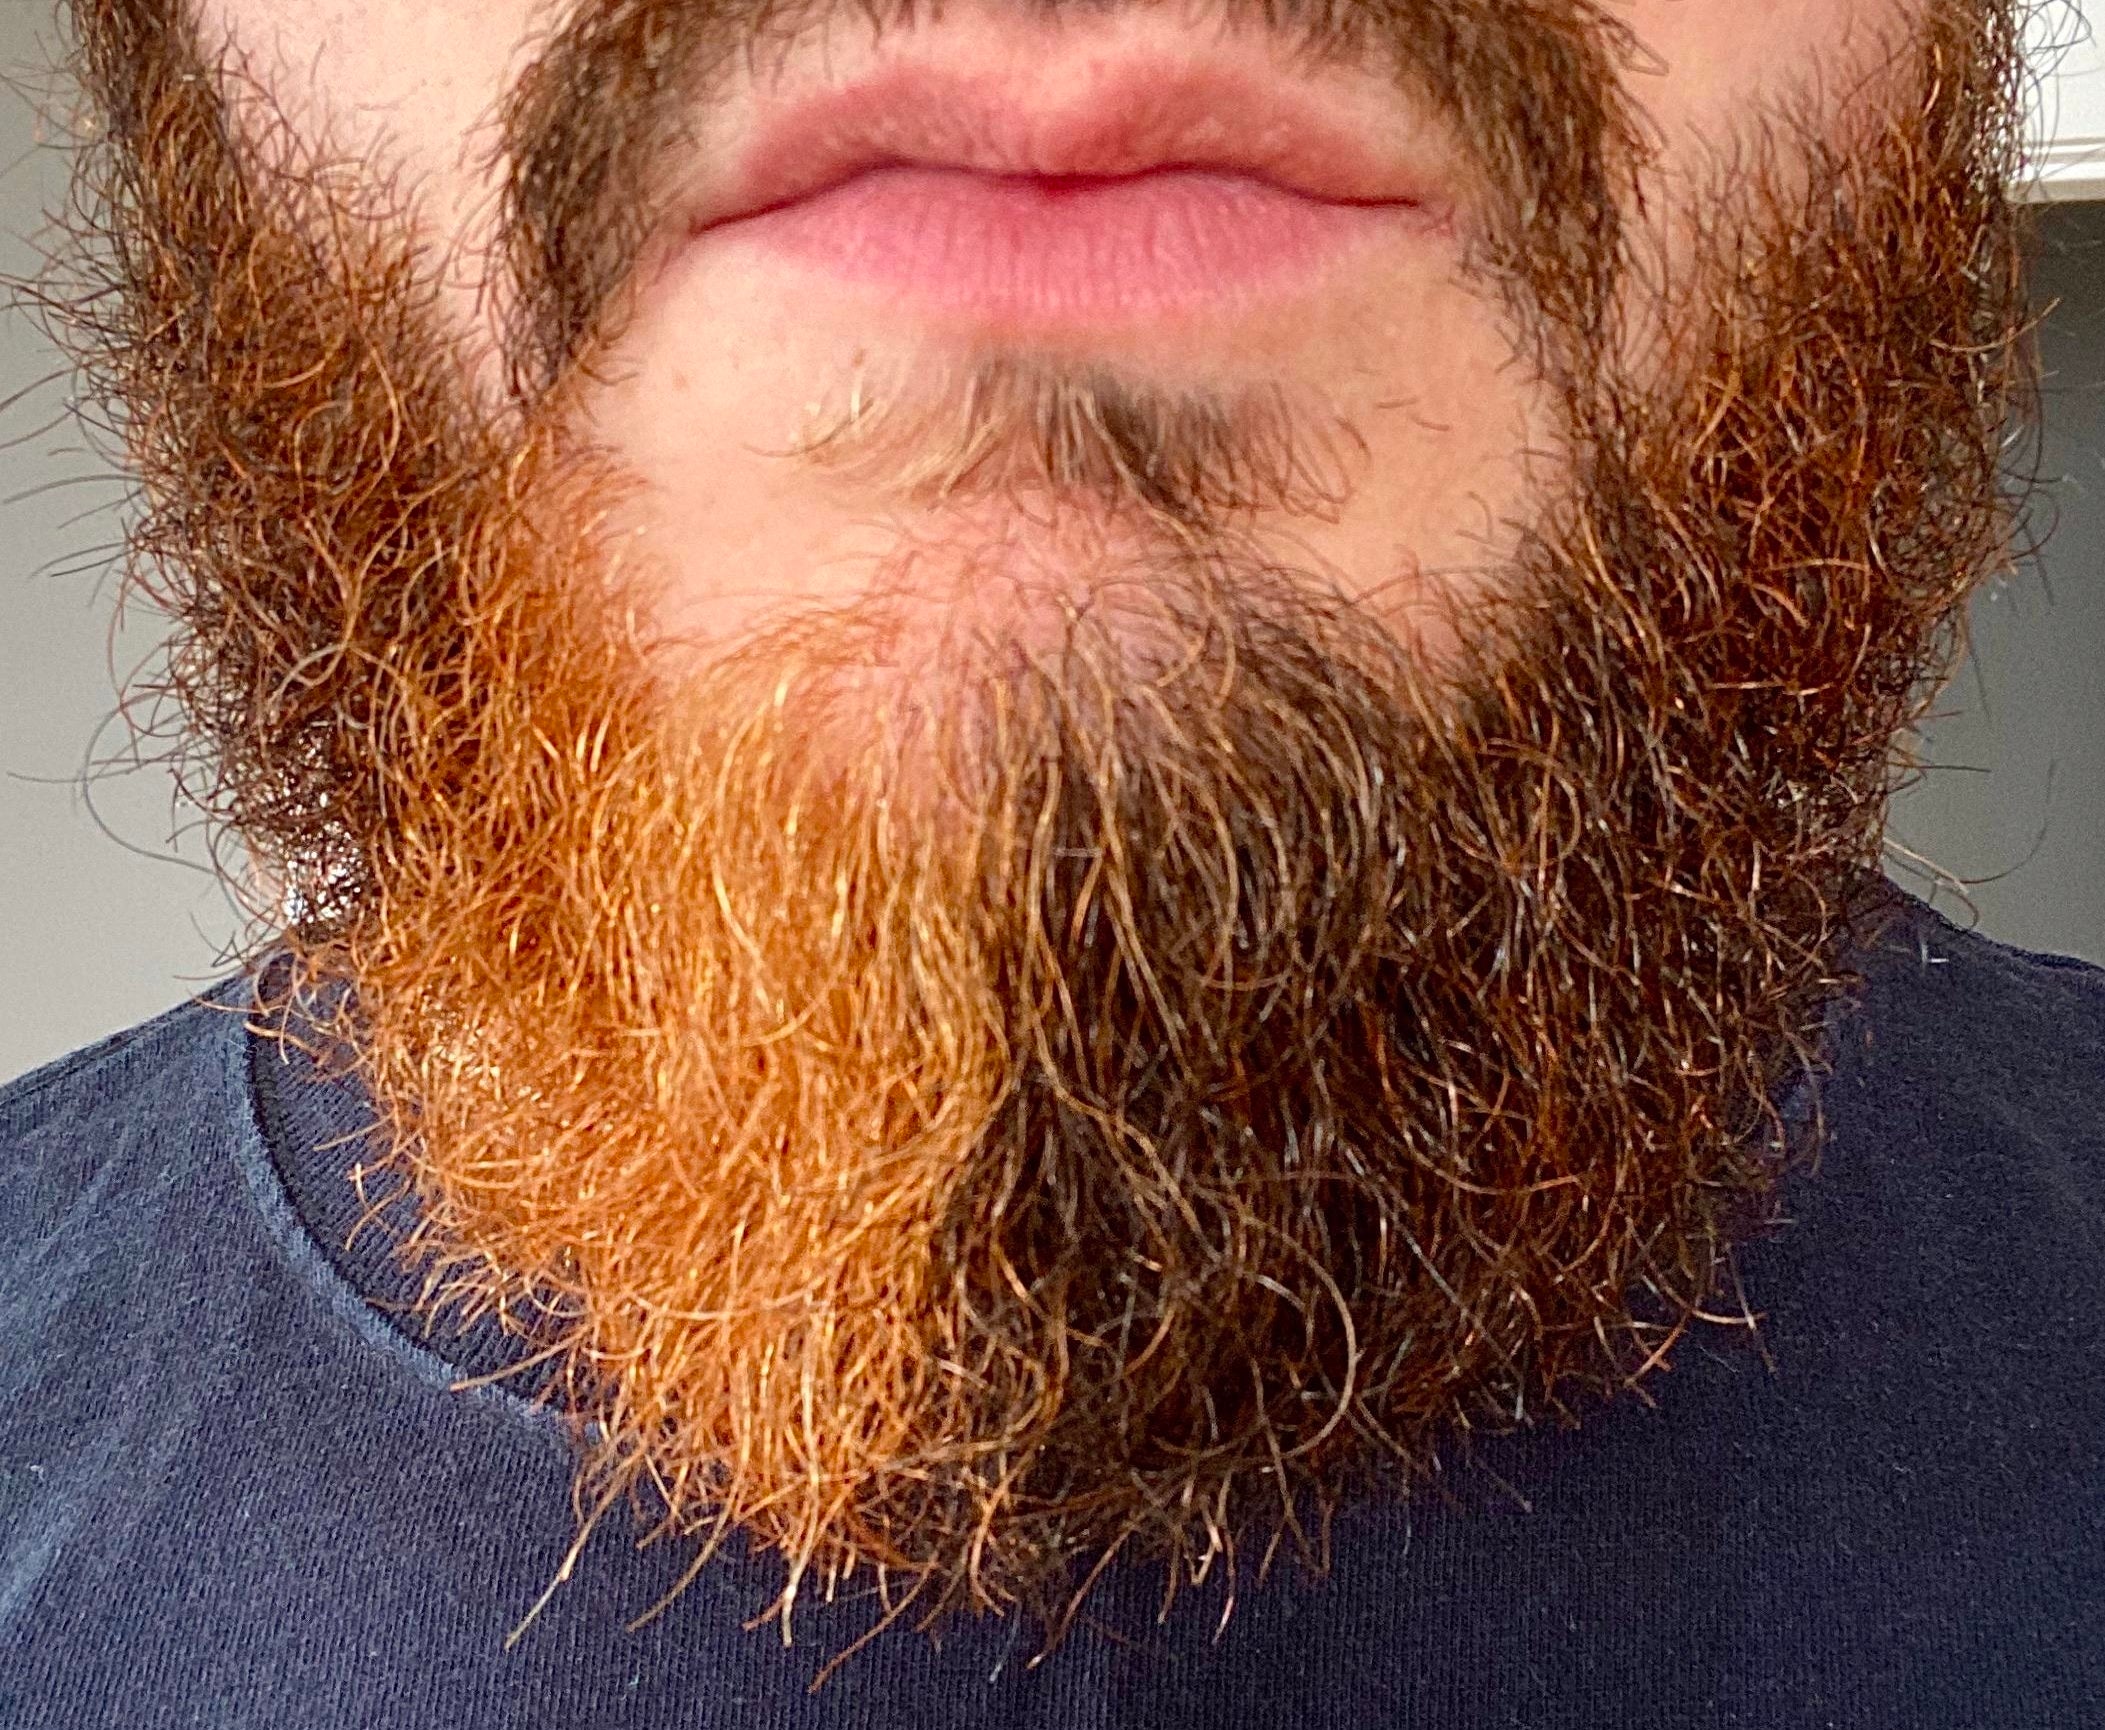 Different-colored beard